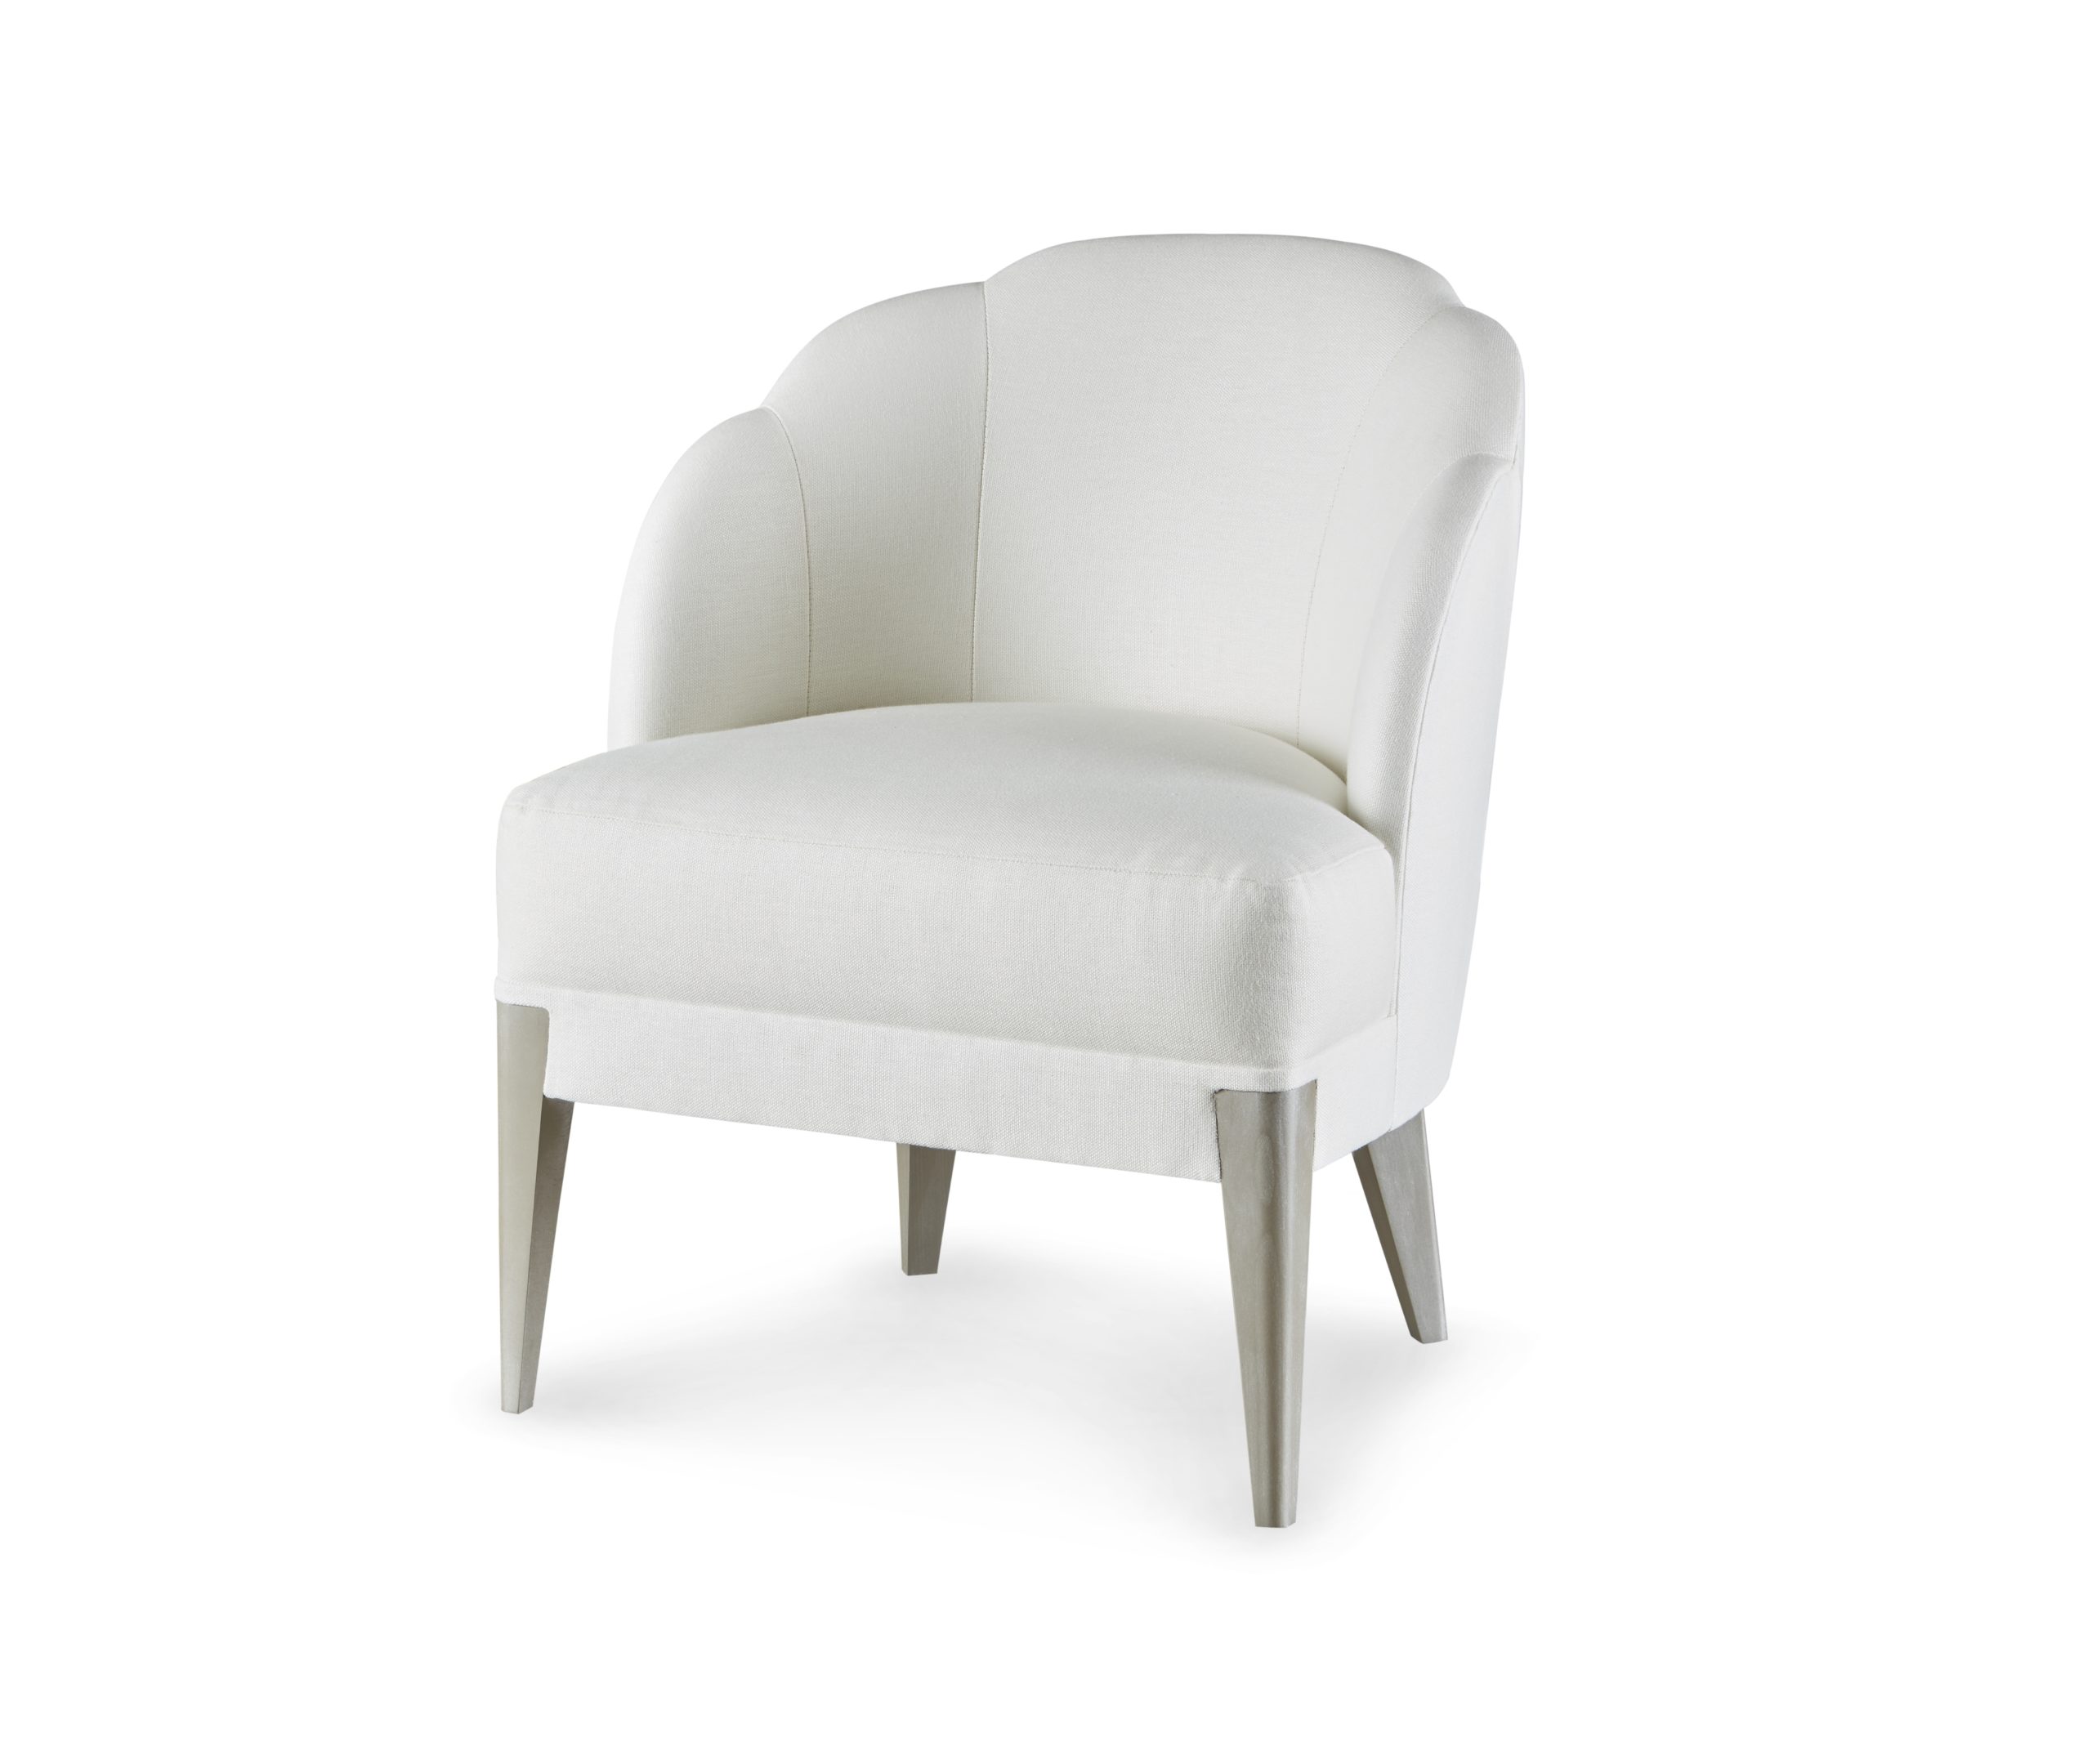 Baker_products_WNWN_sophie_chair_BAU3306c_FRONT_3QRT-scaled-1